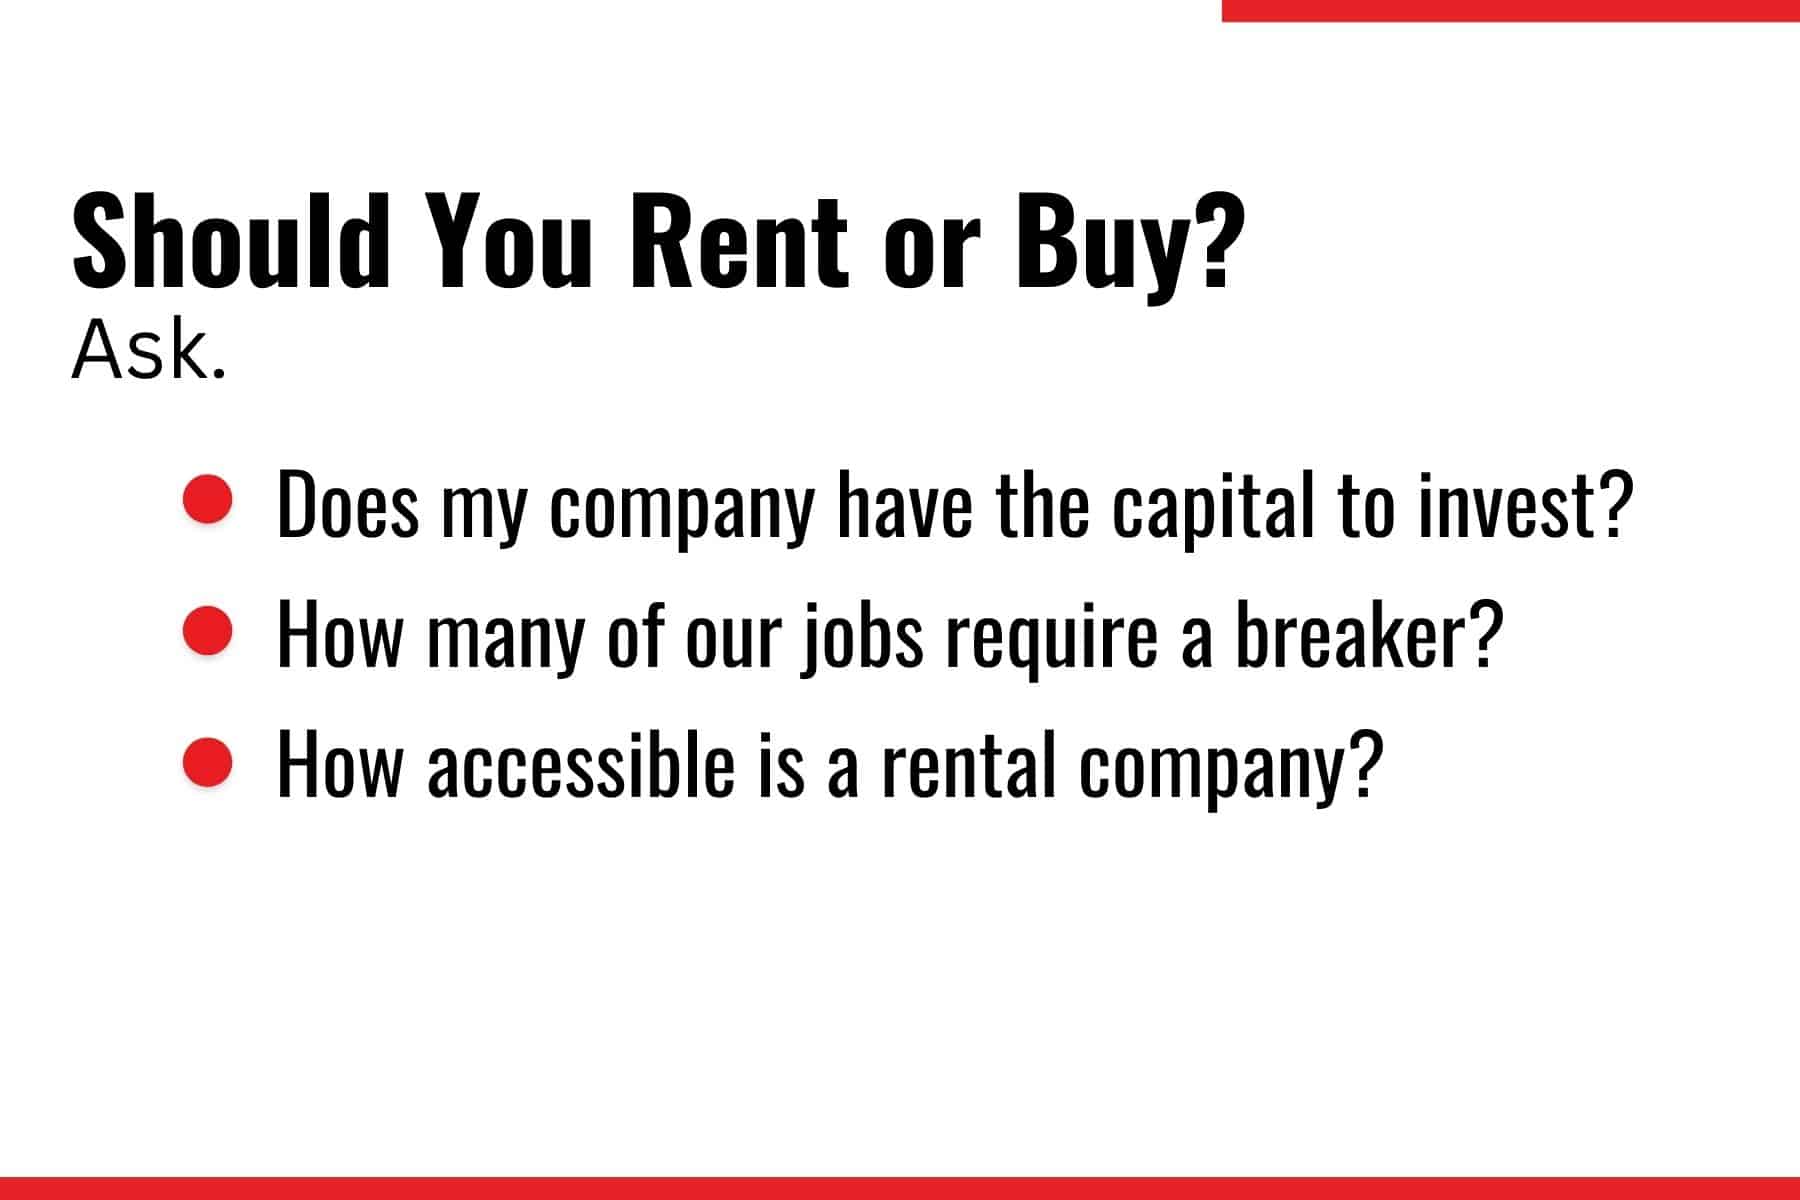 Should you rent or buy?